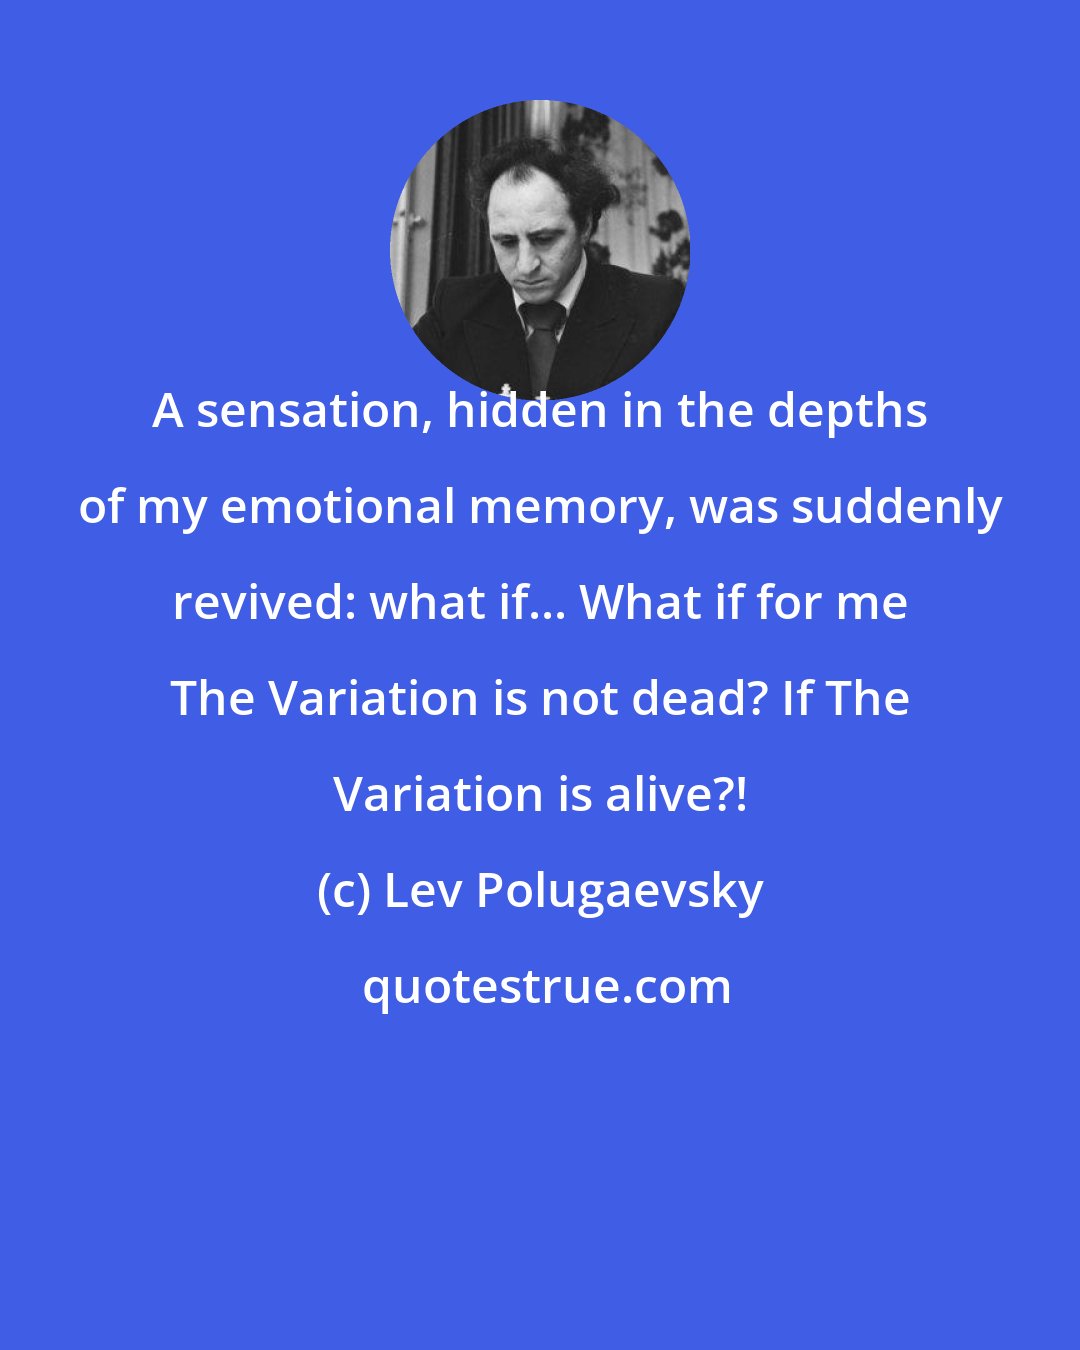 Lev Polugaevsky: A sensation, hidden in the depths of my emotional memory, was suddenly revived: what if... What if for me The Variation is not dead? If The Variation is alive?!